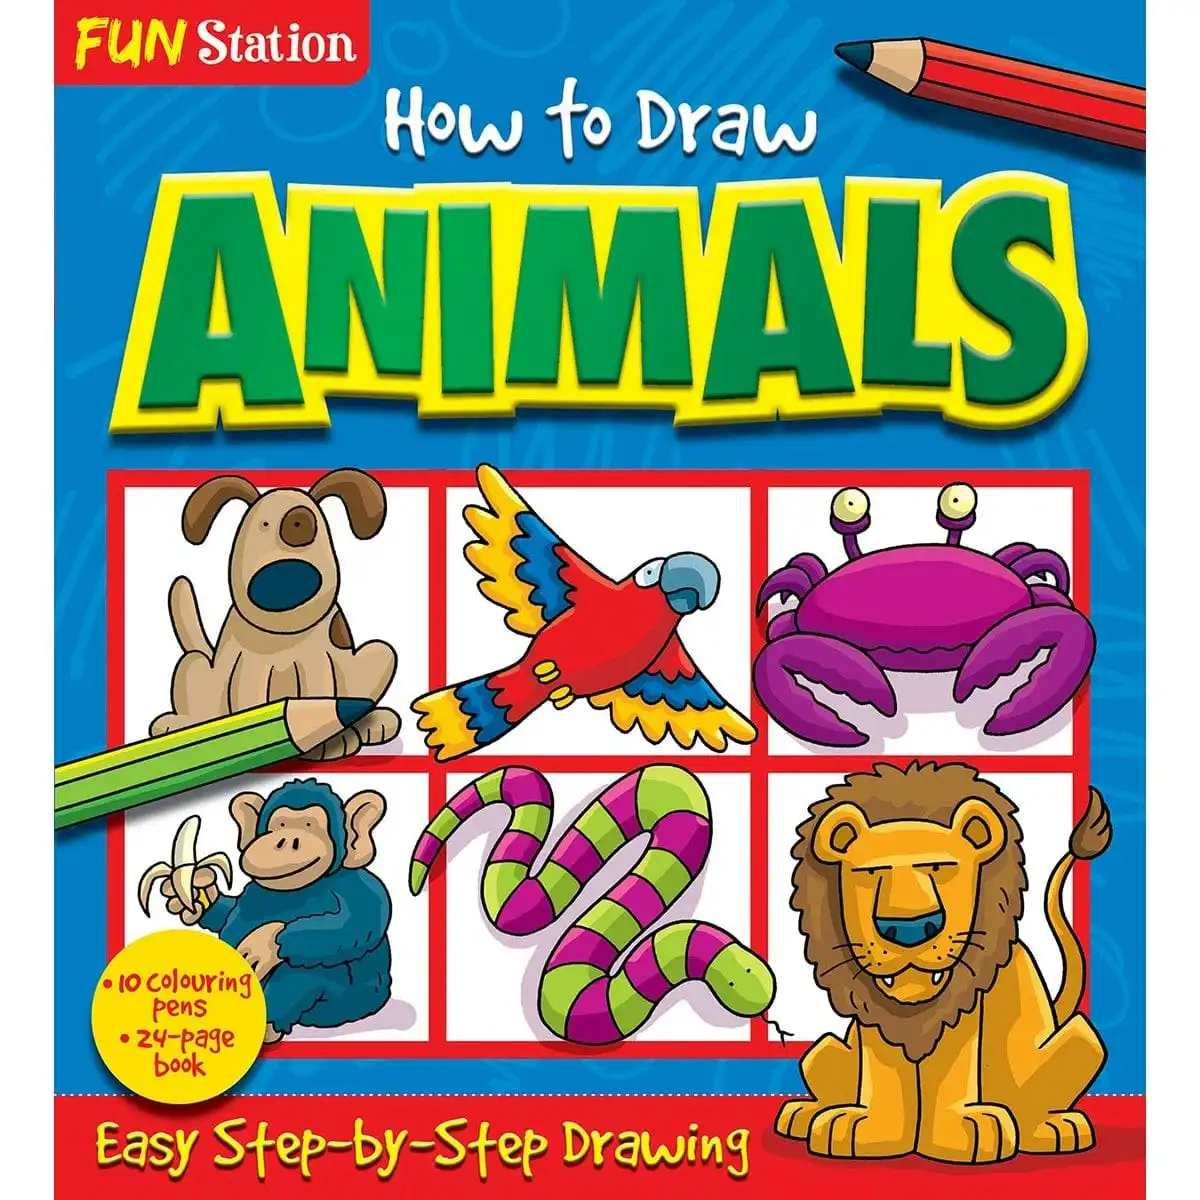 Imagine That How To Draw Animals